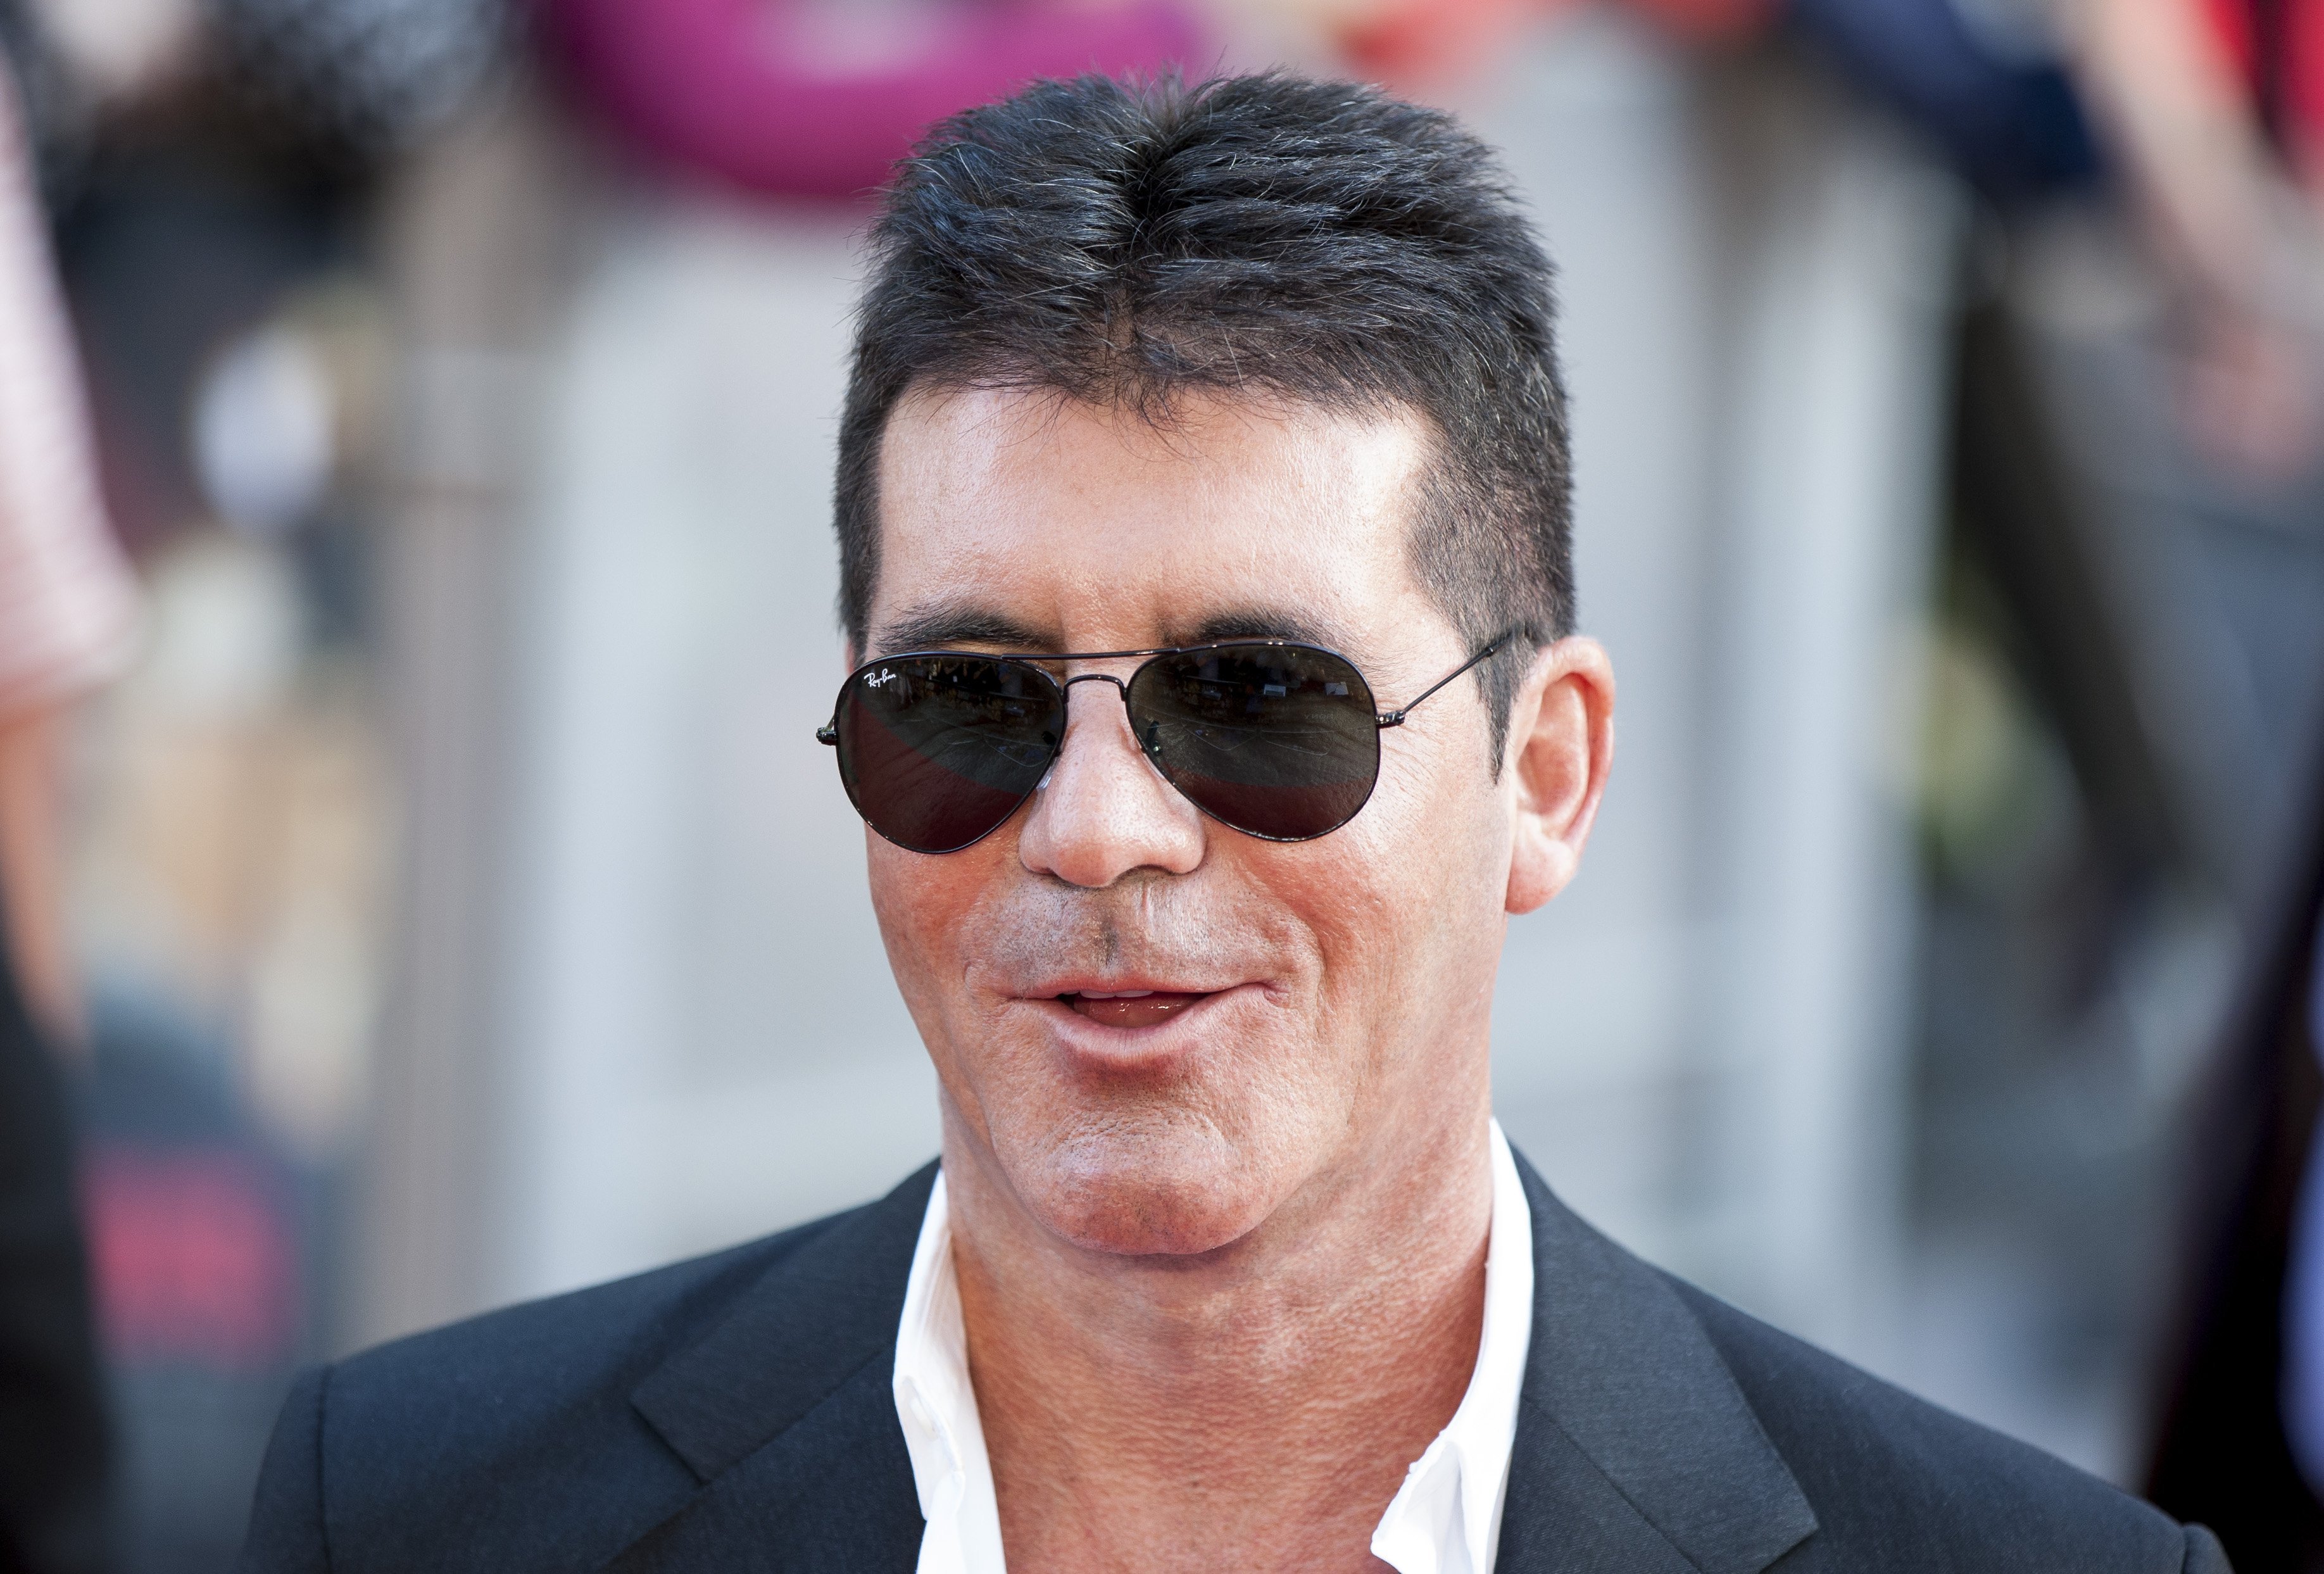 Simon Cowell at the world premiere of "One Direction: This is Us" in August 2013. | Photo: Getty Images